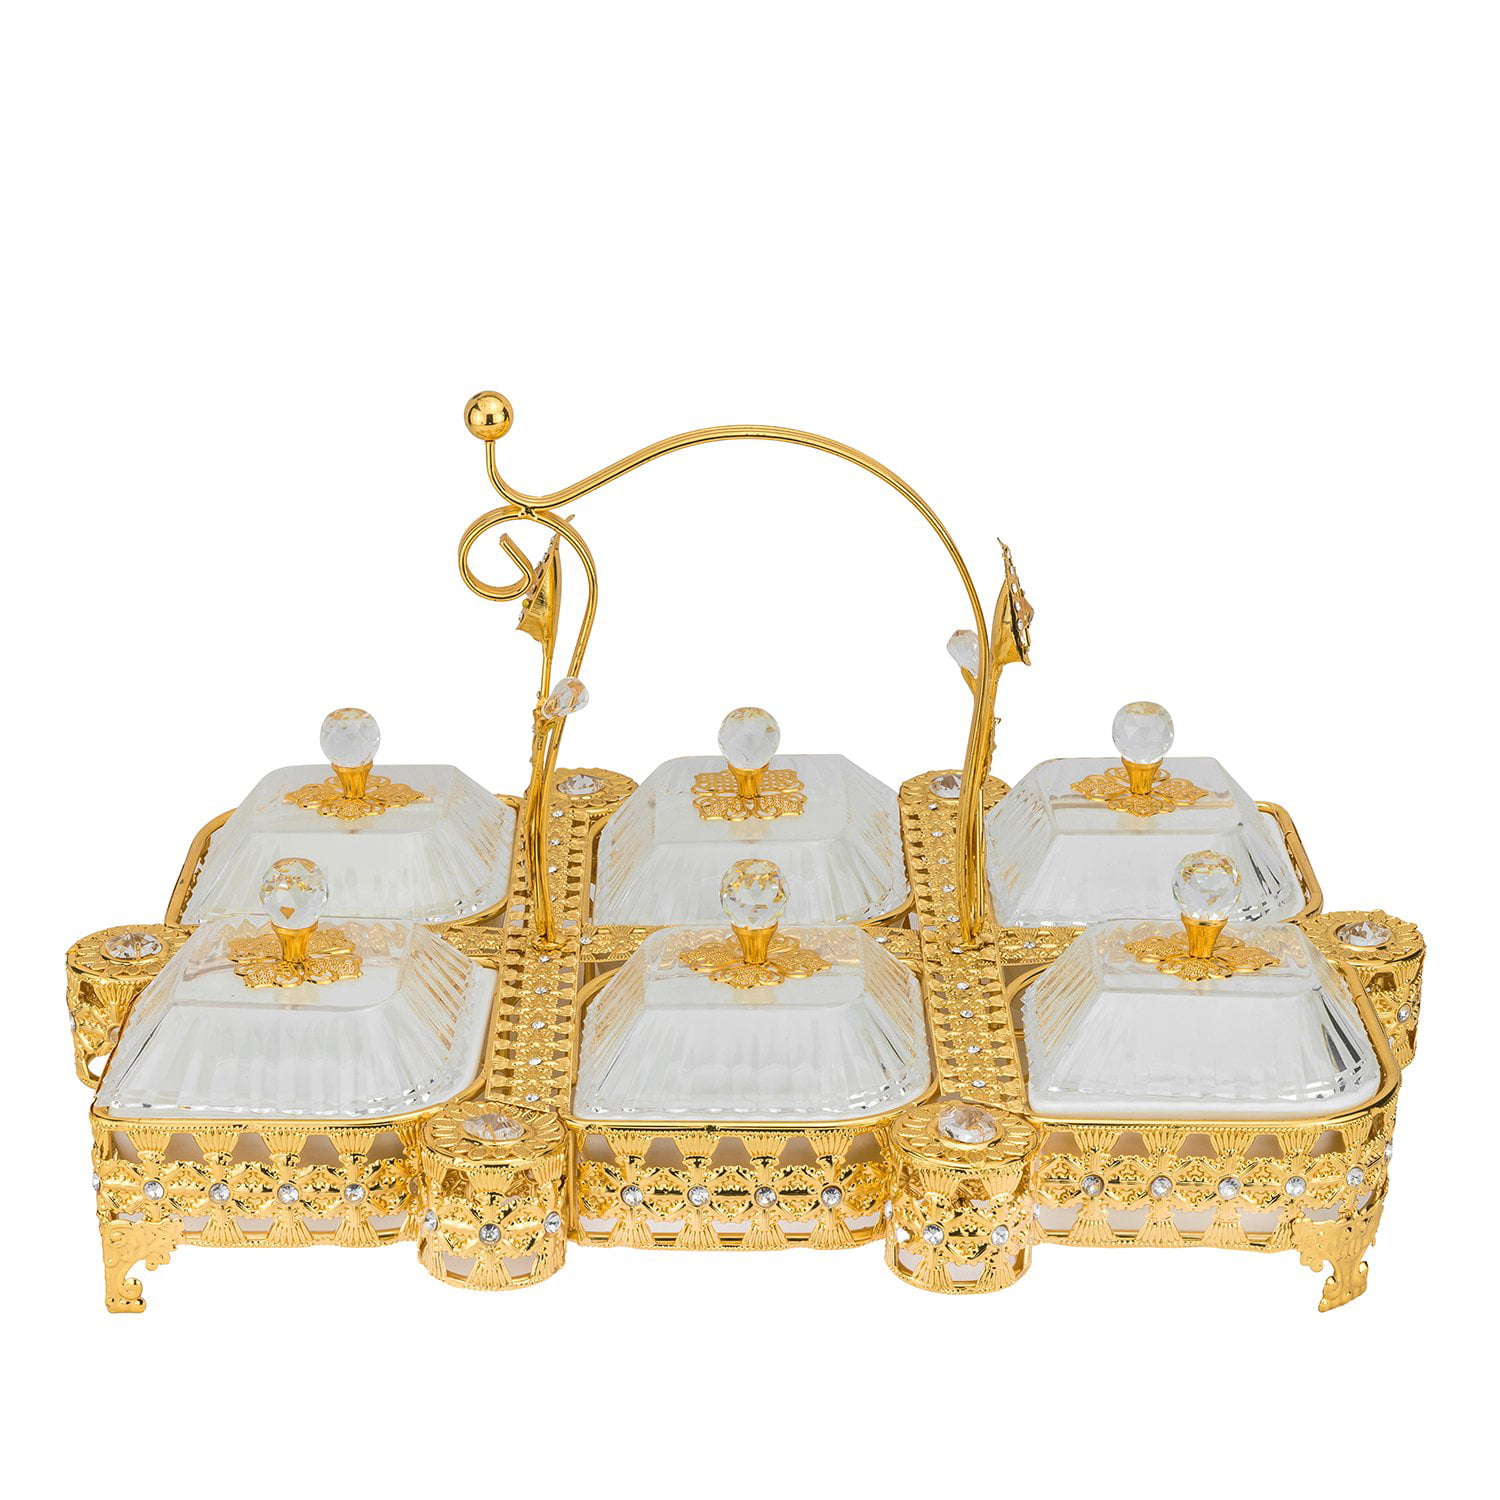 Italian Collection Gold Sectional Сandy Serving Tray with Handle for Candy 